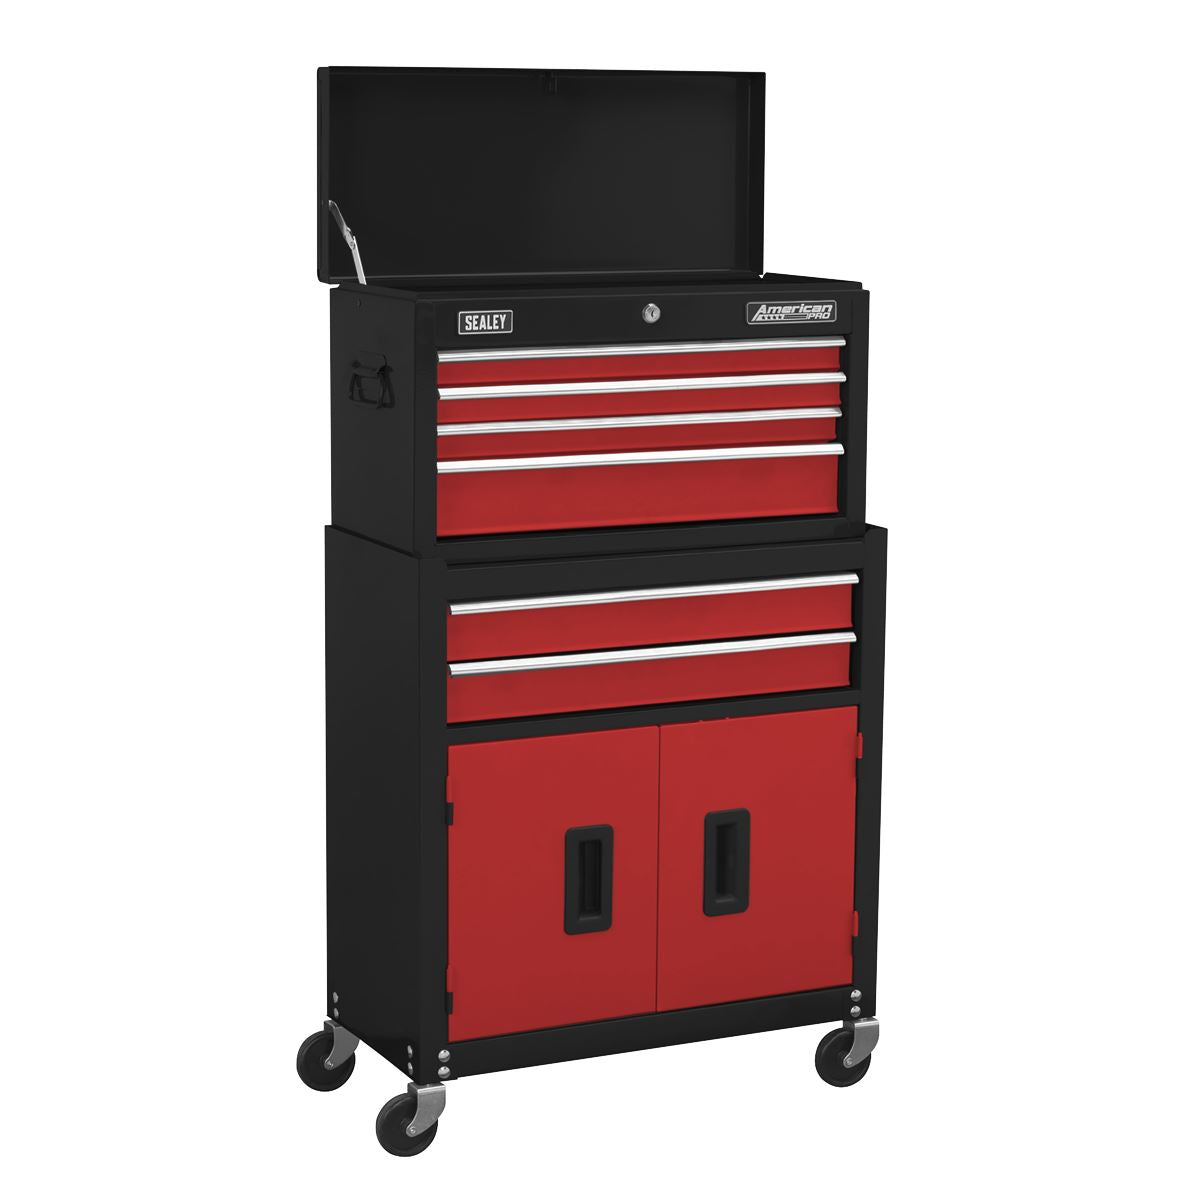 Sealey American Pro Topchest & Rollcab Combination 6 Drawer with Ball-Bearing Slides - Red